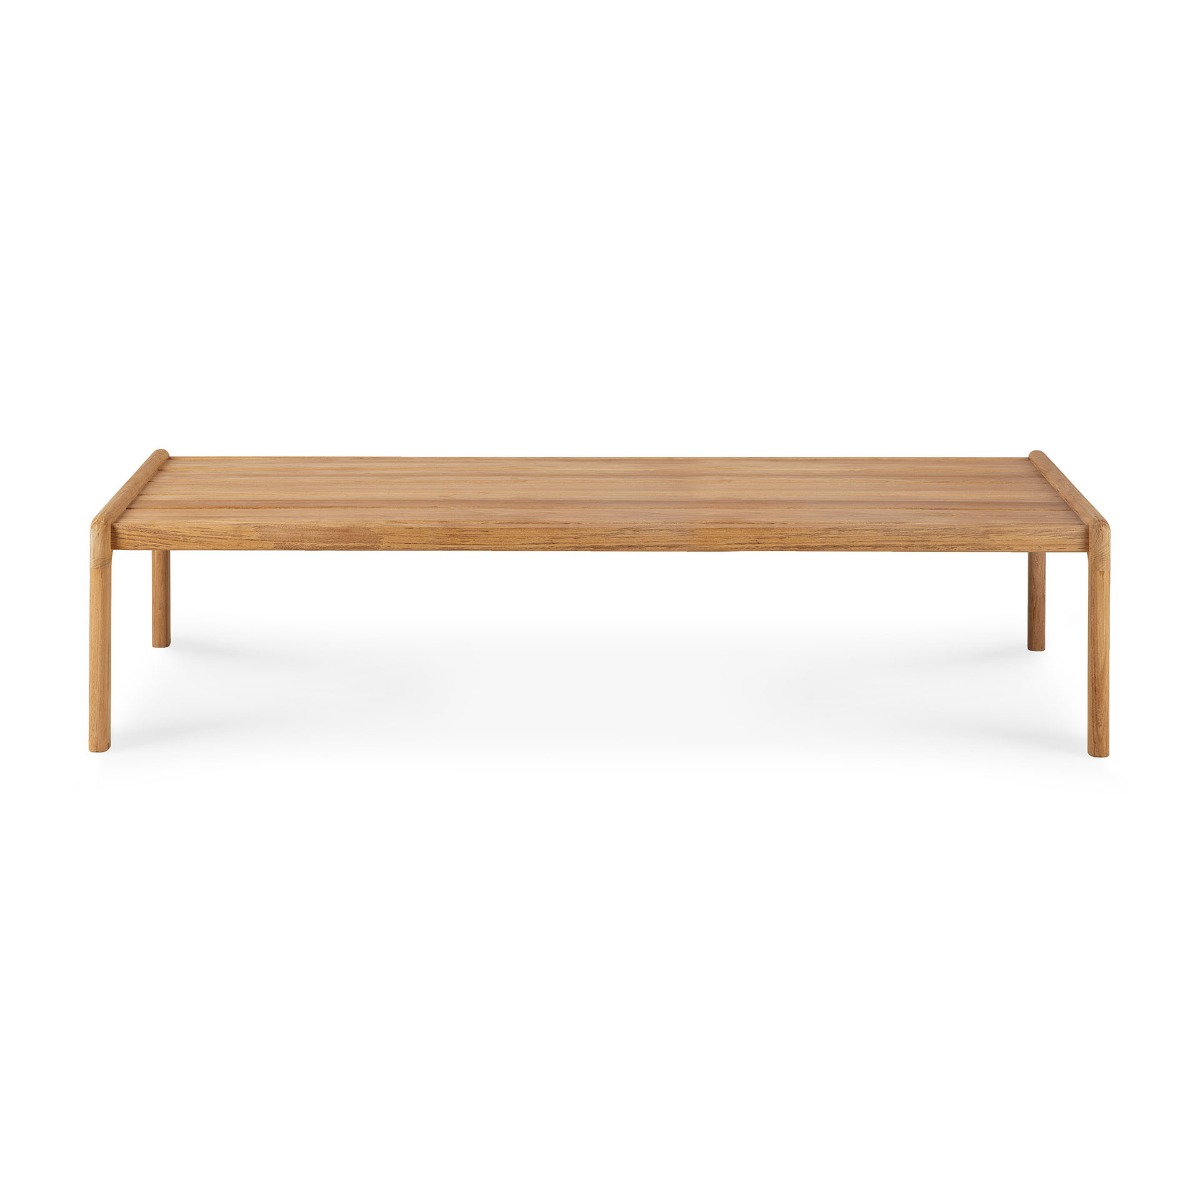 https://www.fundesign.nl/media/catalog/product/1/0/10259_teak_outdoor_jack_coffee_table_front_cut_web.jpg